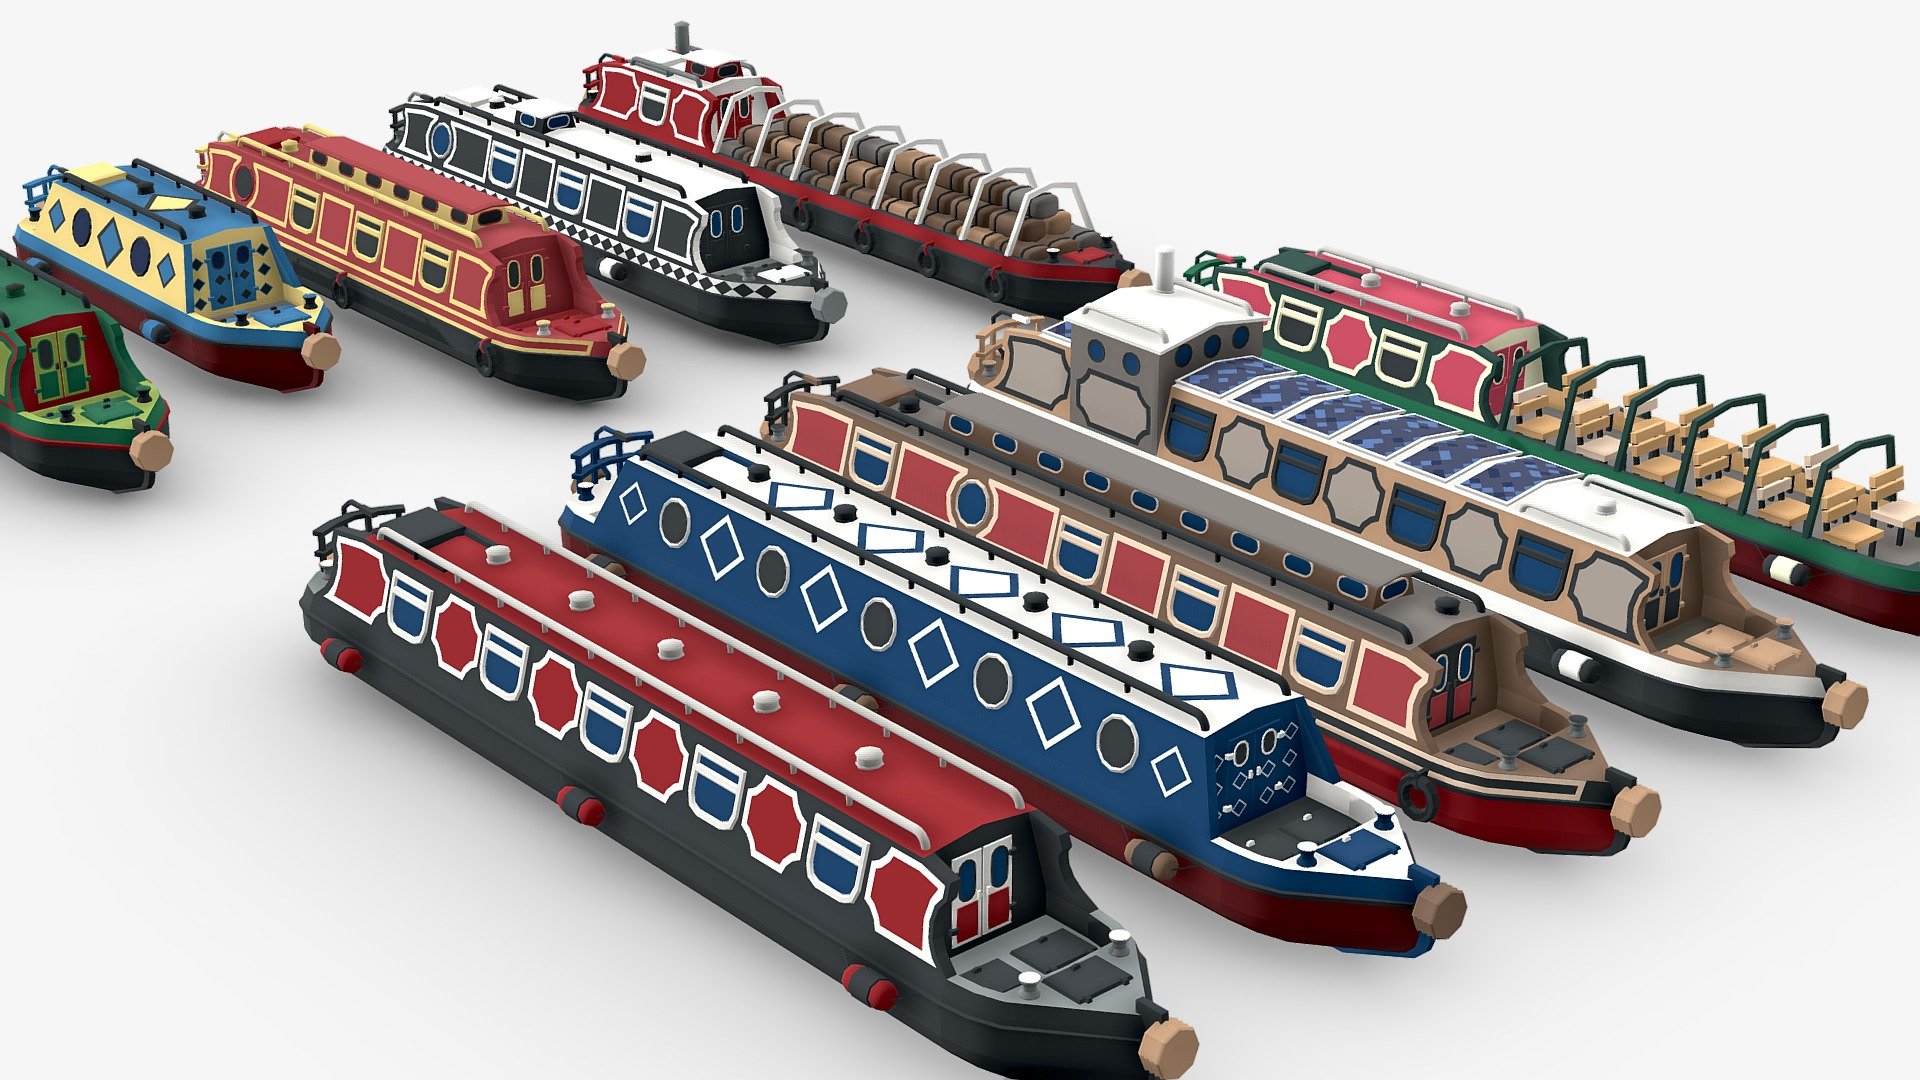 Narrowboats models in low poly style.
Ten different types of boats
The model is in the center of coordinates 3d model